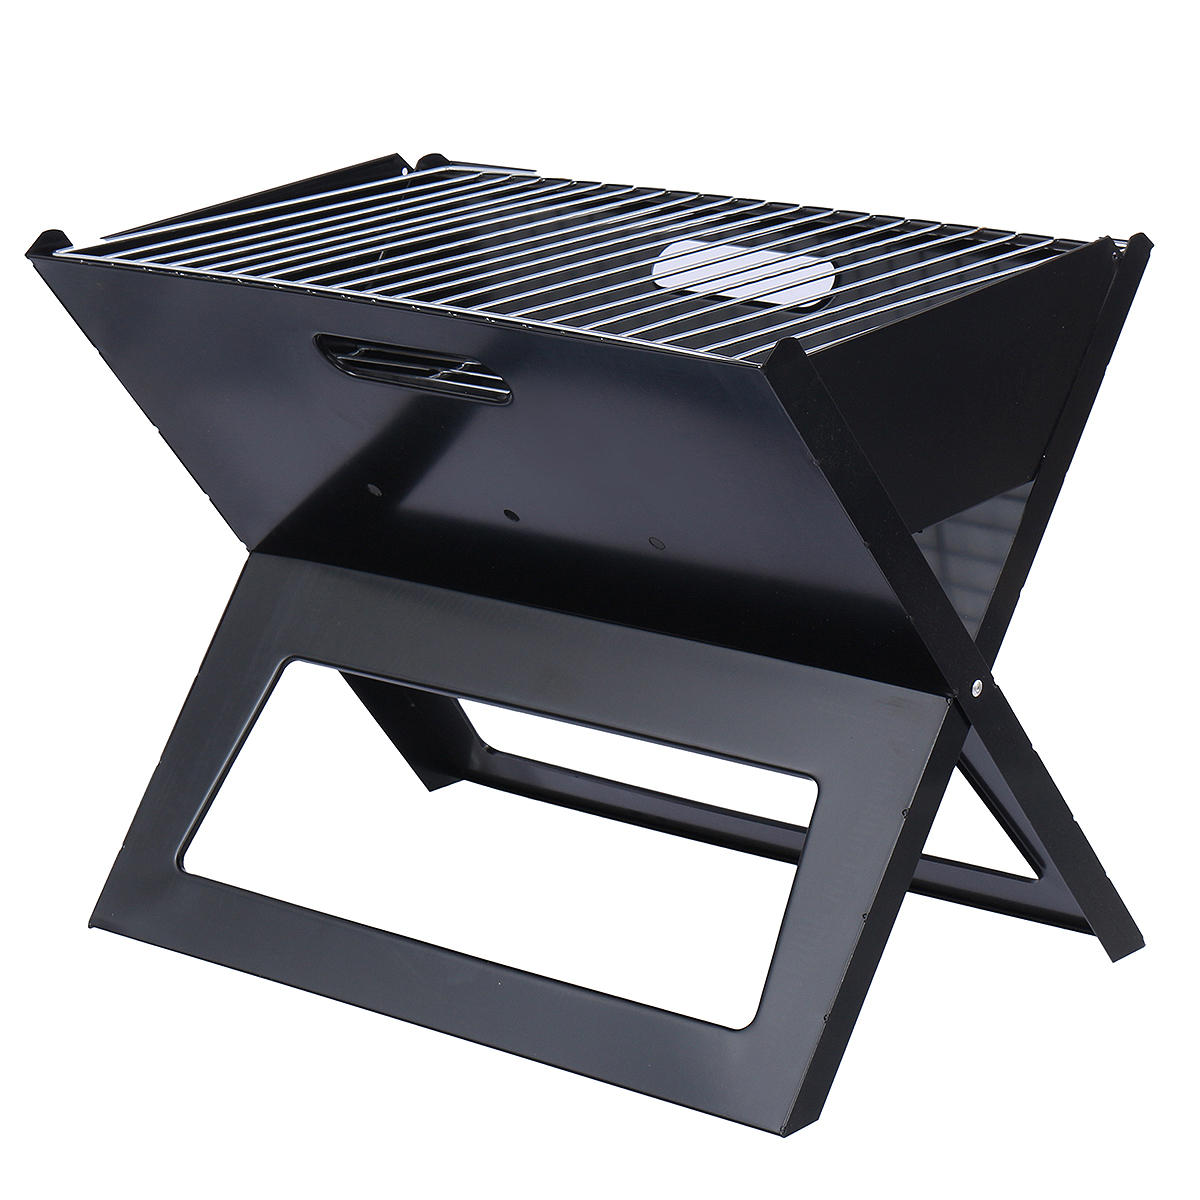 3-5 People Outdoor Portable Folding Barbecue BBQ Grill Charcoal Cooking Stove Camping Picnic